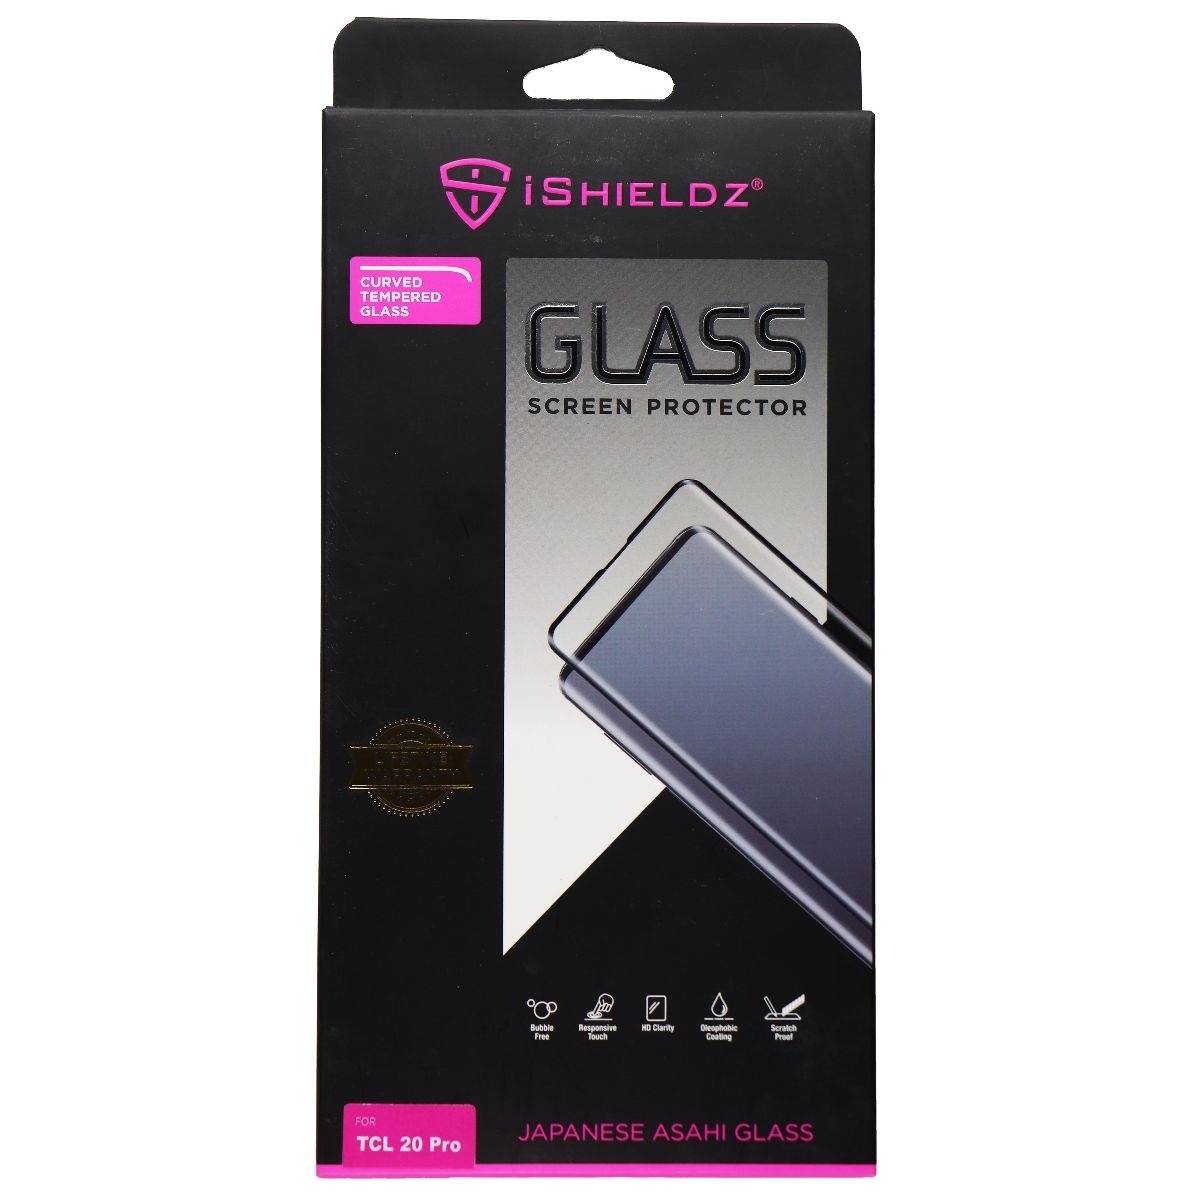 IShieldz Curved Tempered Glass Screen Protector For TCL 20 Pro - Clear (Refurbished)